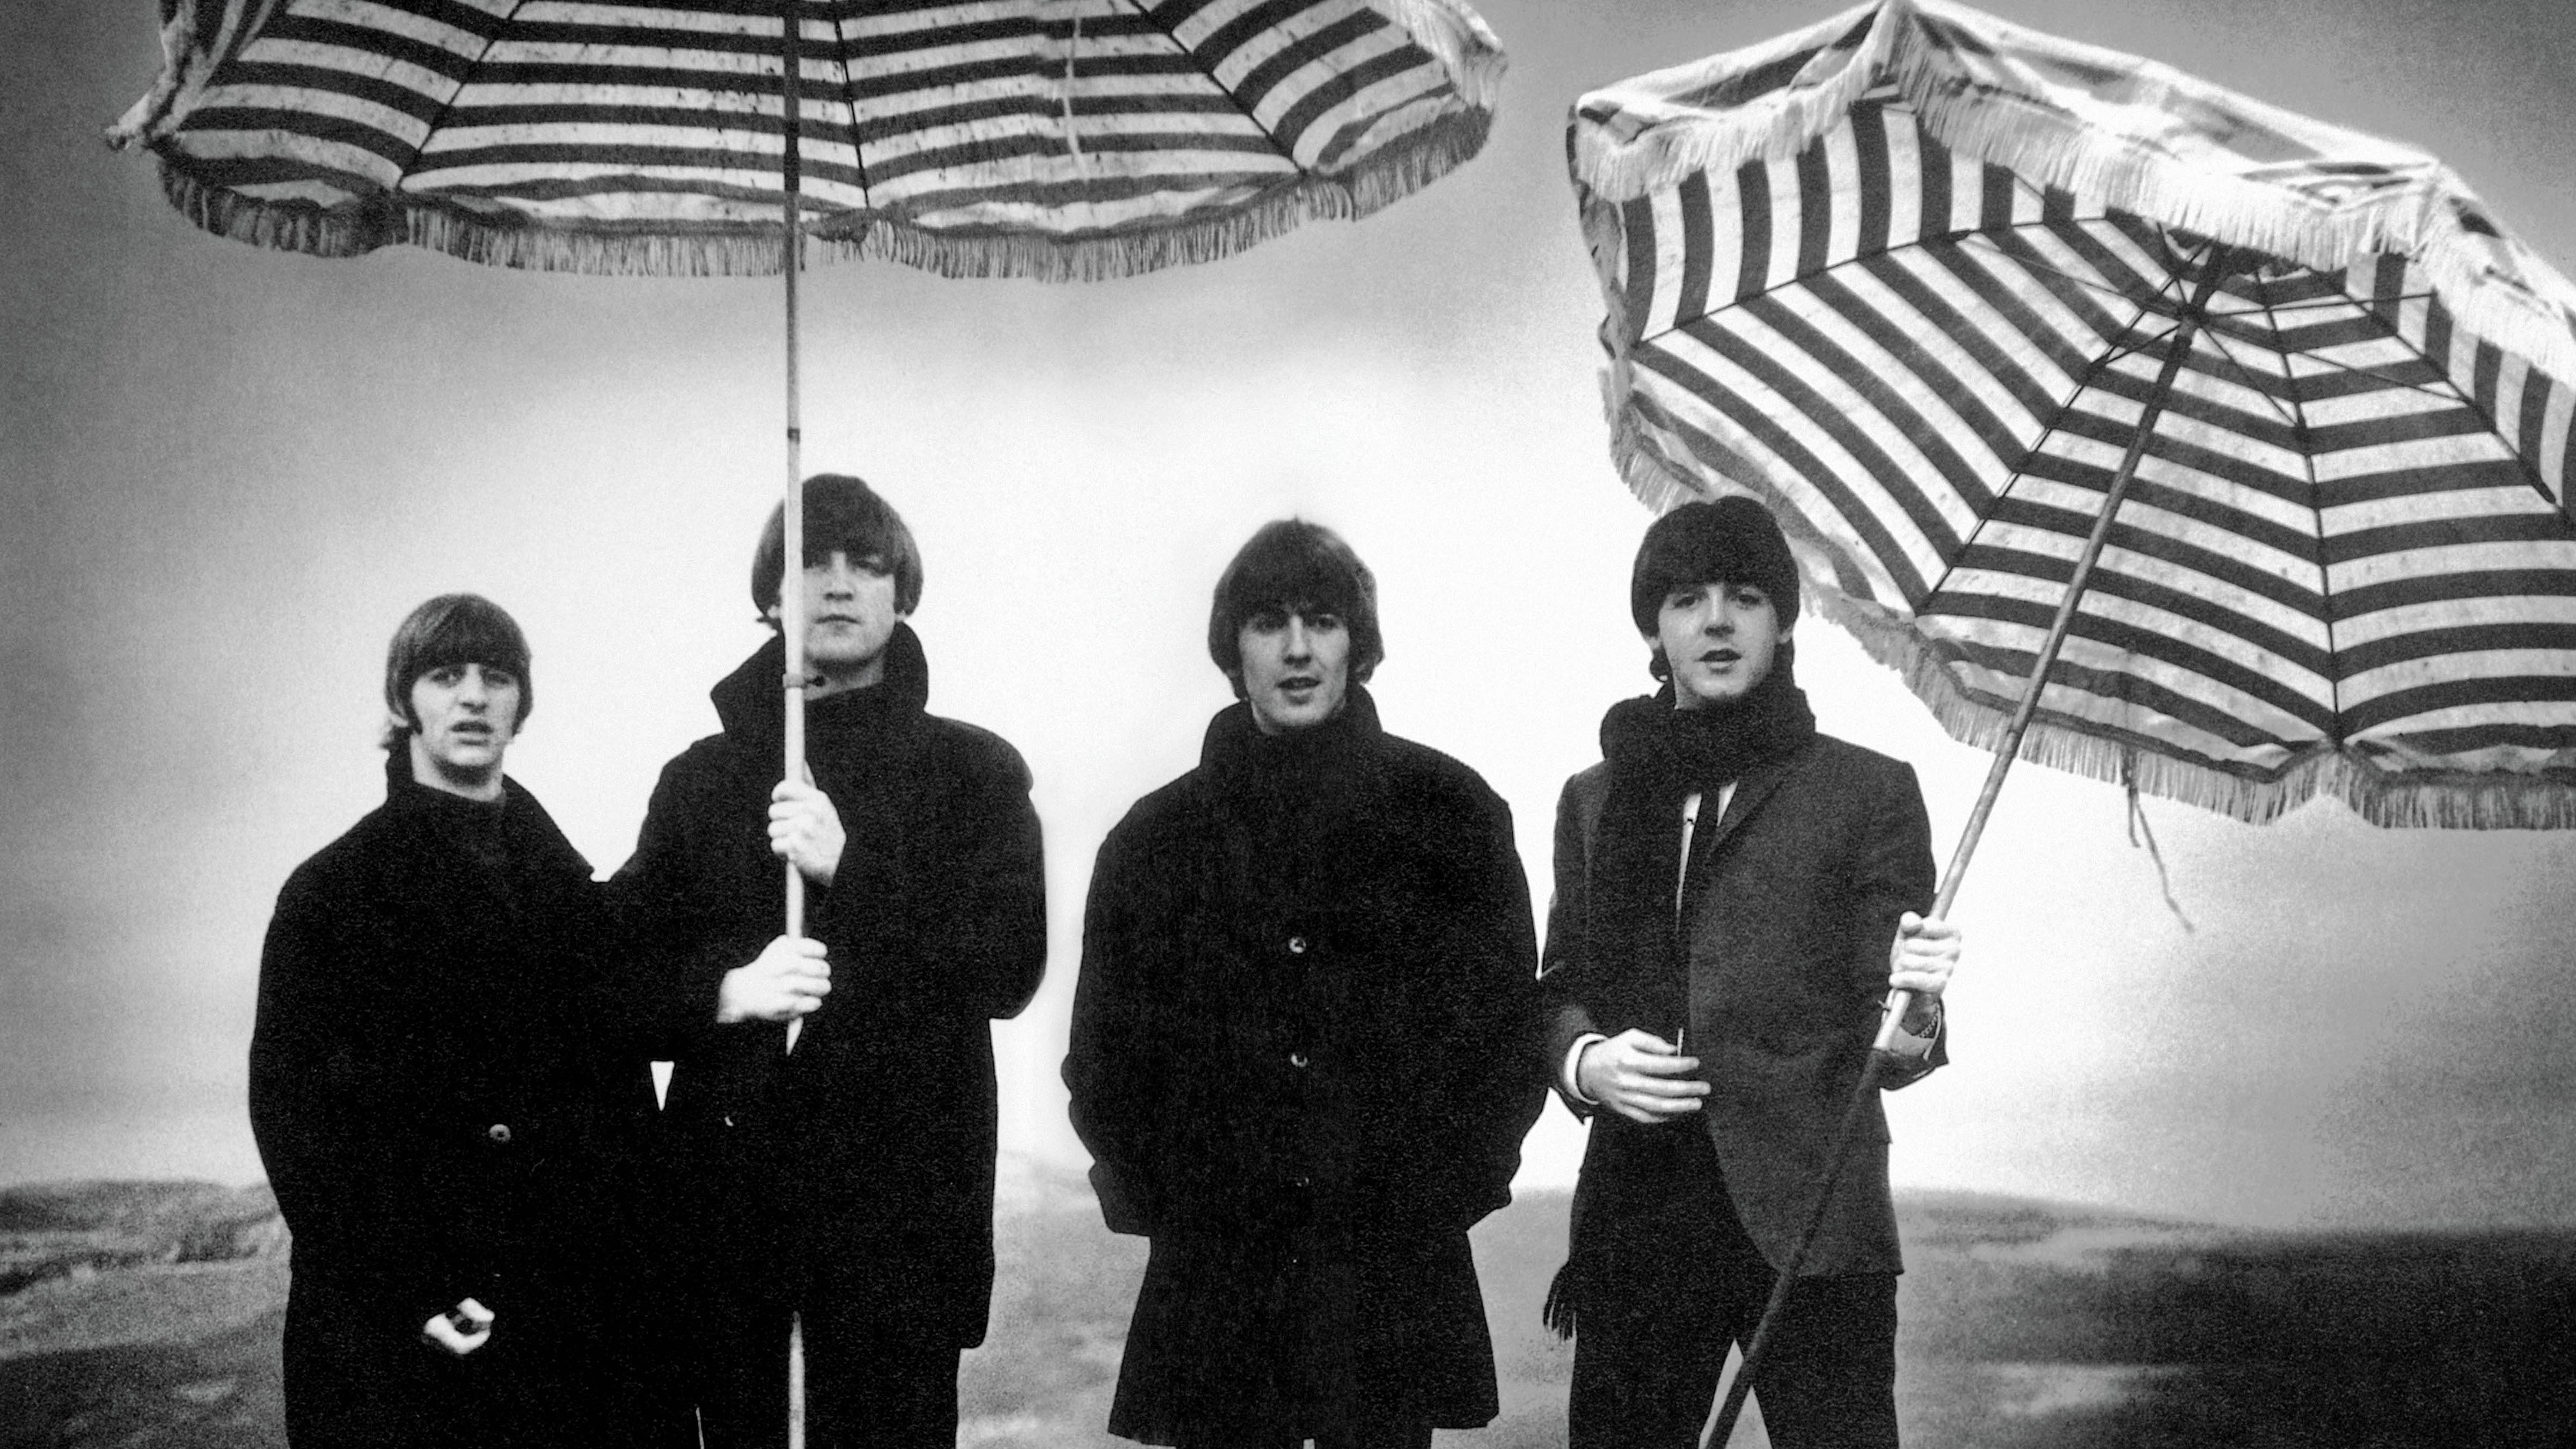 8 Songs A Week: Vote for Your Favorite Beatles and Solo Songs to 'Remember'